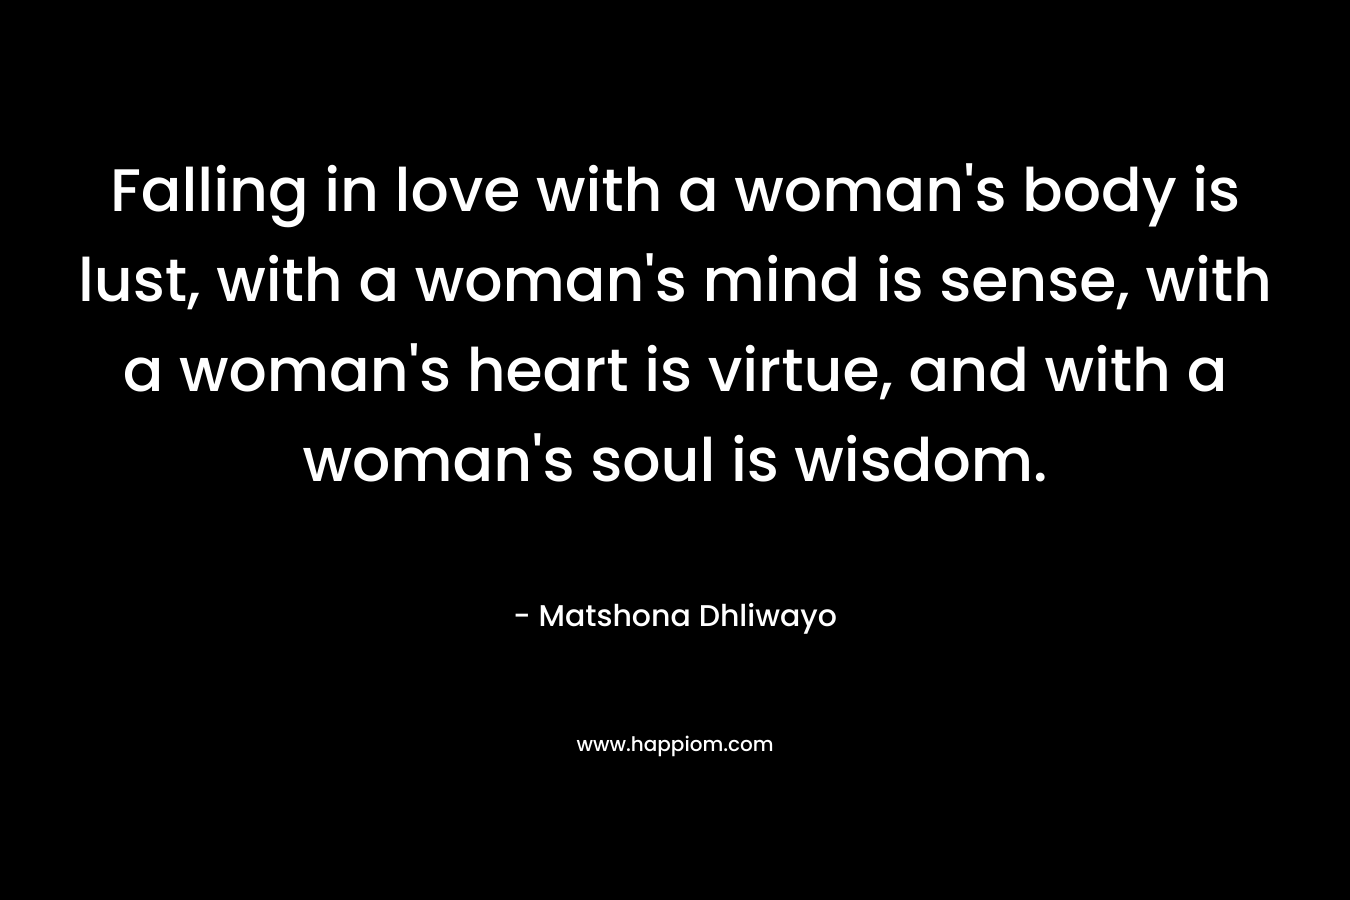 Falling in love with a woman's body is lust, with a woman's mind is sense, with a woman's heart is virtue, and with a woman's soul is wisdom.